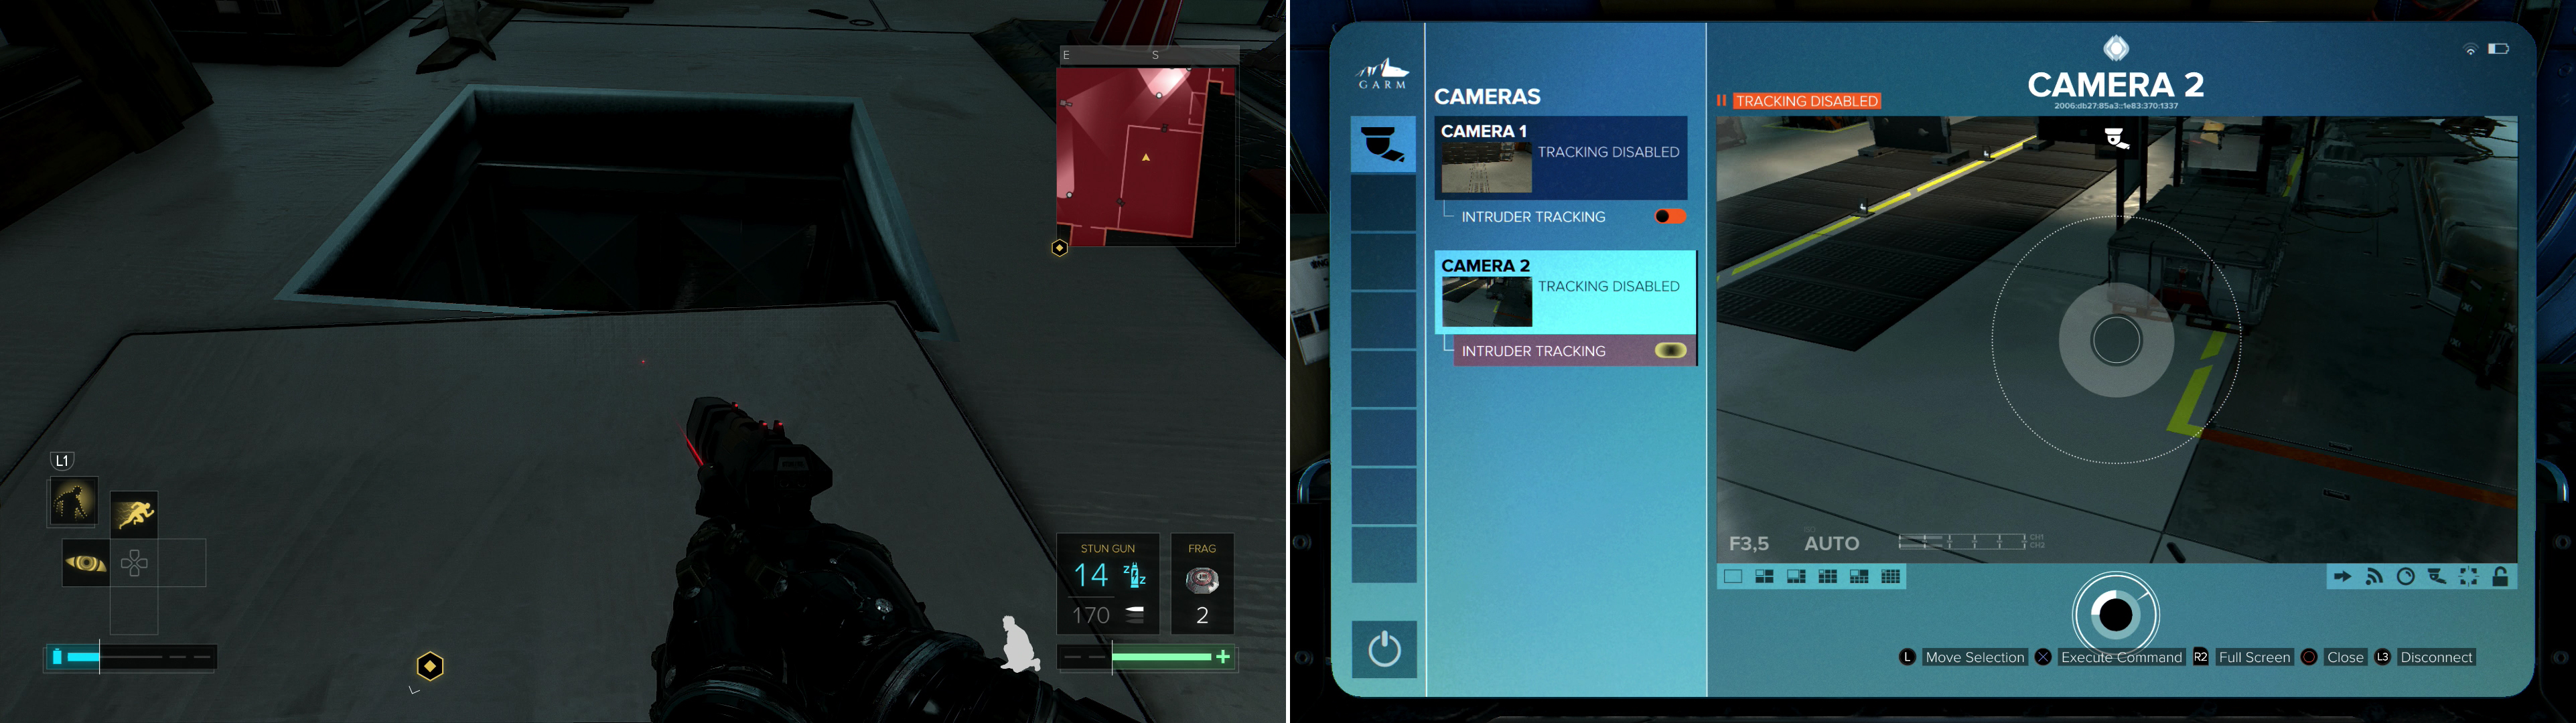 Head into a tent in Hangar 2 to find a hatch (left) which you can use to reach some lightly-guarded security computers (right).